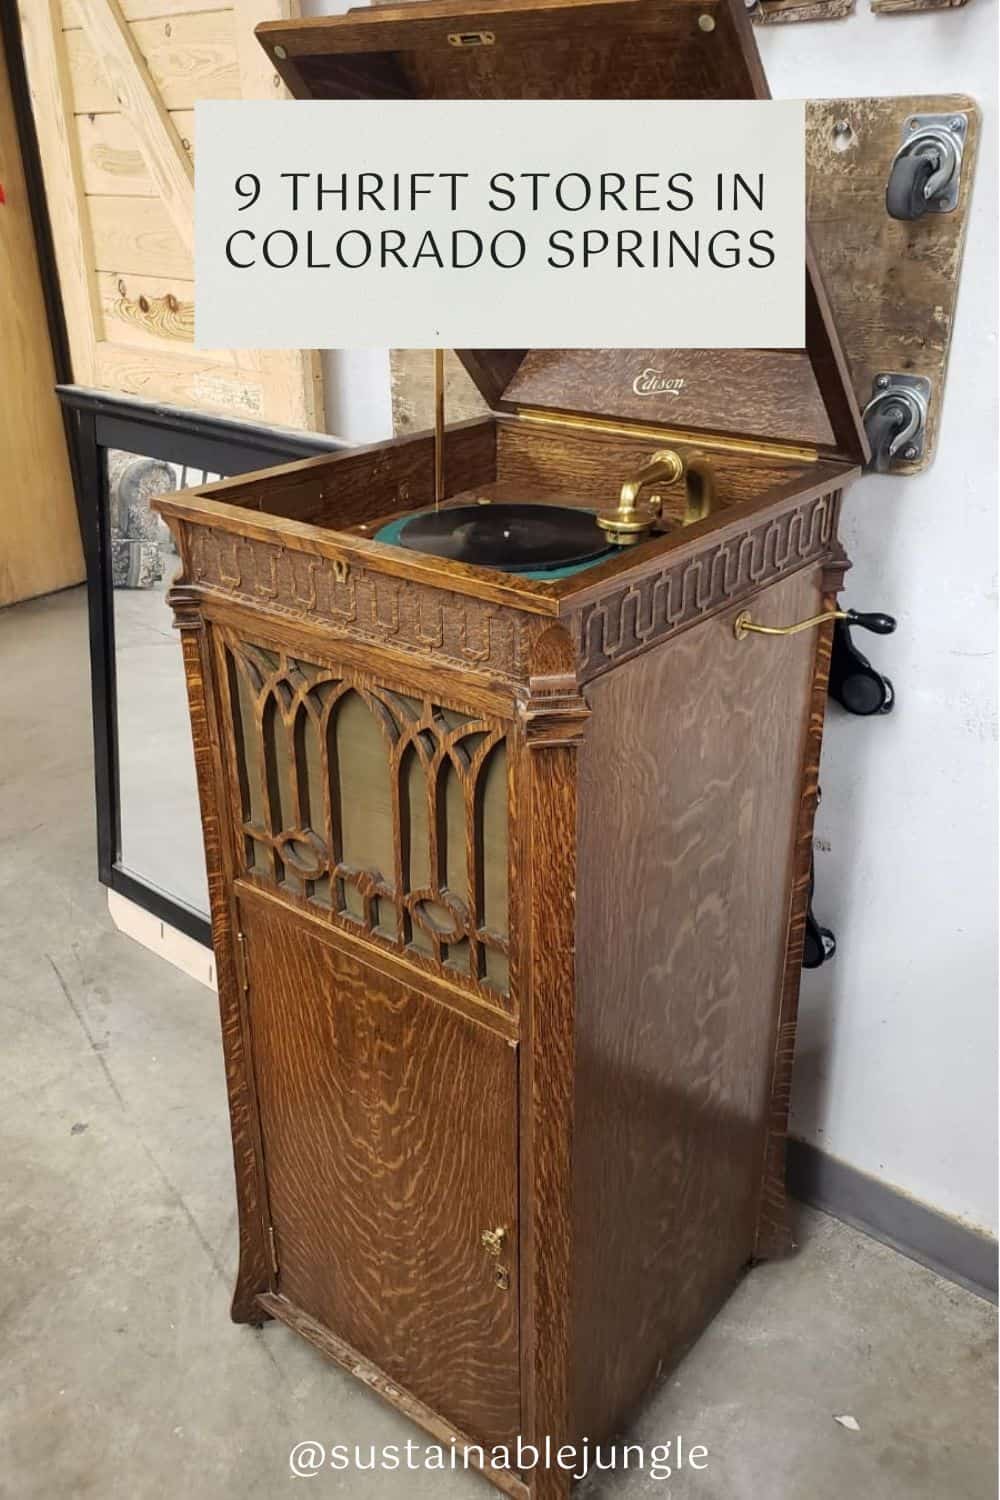 9 Colorado Springs Thrift Stores For Rocky Mountain Retail Therapy Image by New Horizons #thriftstorescoloradosprings #coloradospringscoloradosprings #secondhandstorescoloradosprings #bestthriftstoresincoloradosprings #thriftshopcoloradosprings #sustainablejungle